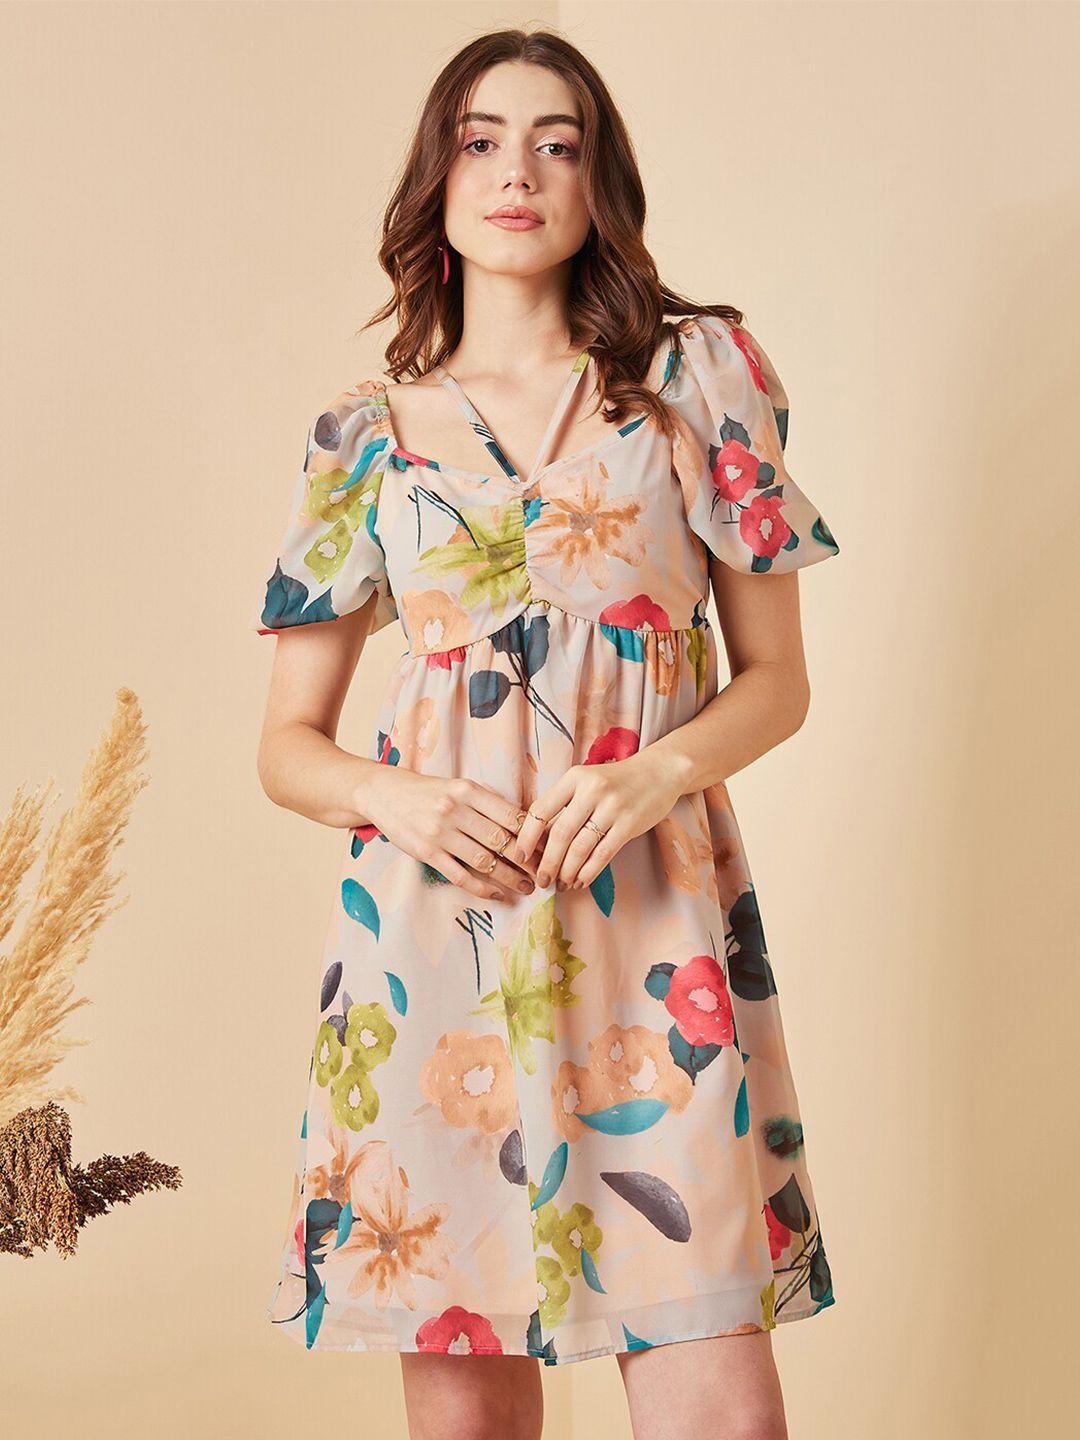 carlton-london-floral-printed-v-neck-puff-sleeves-fit-&-flare-dress